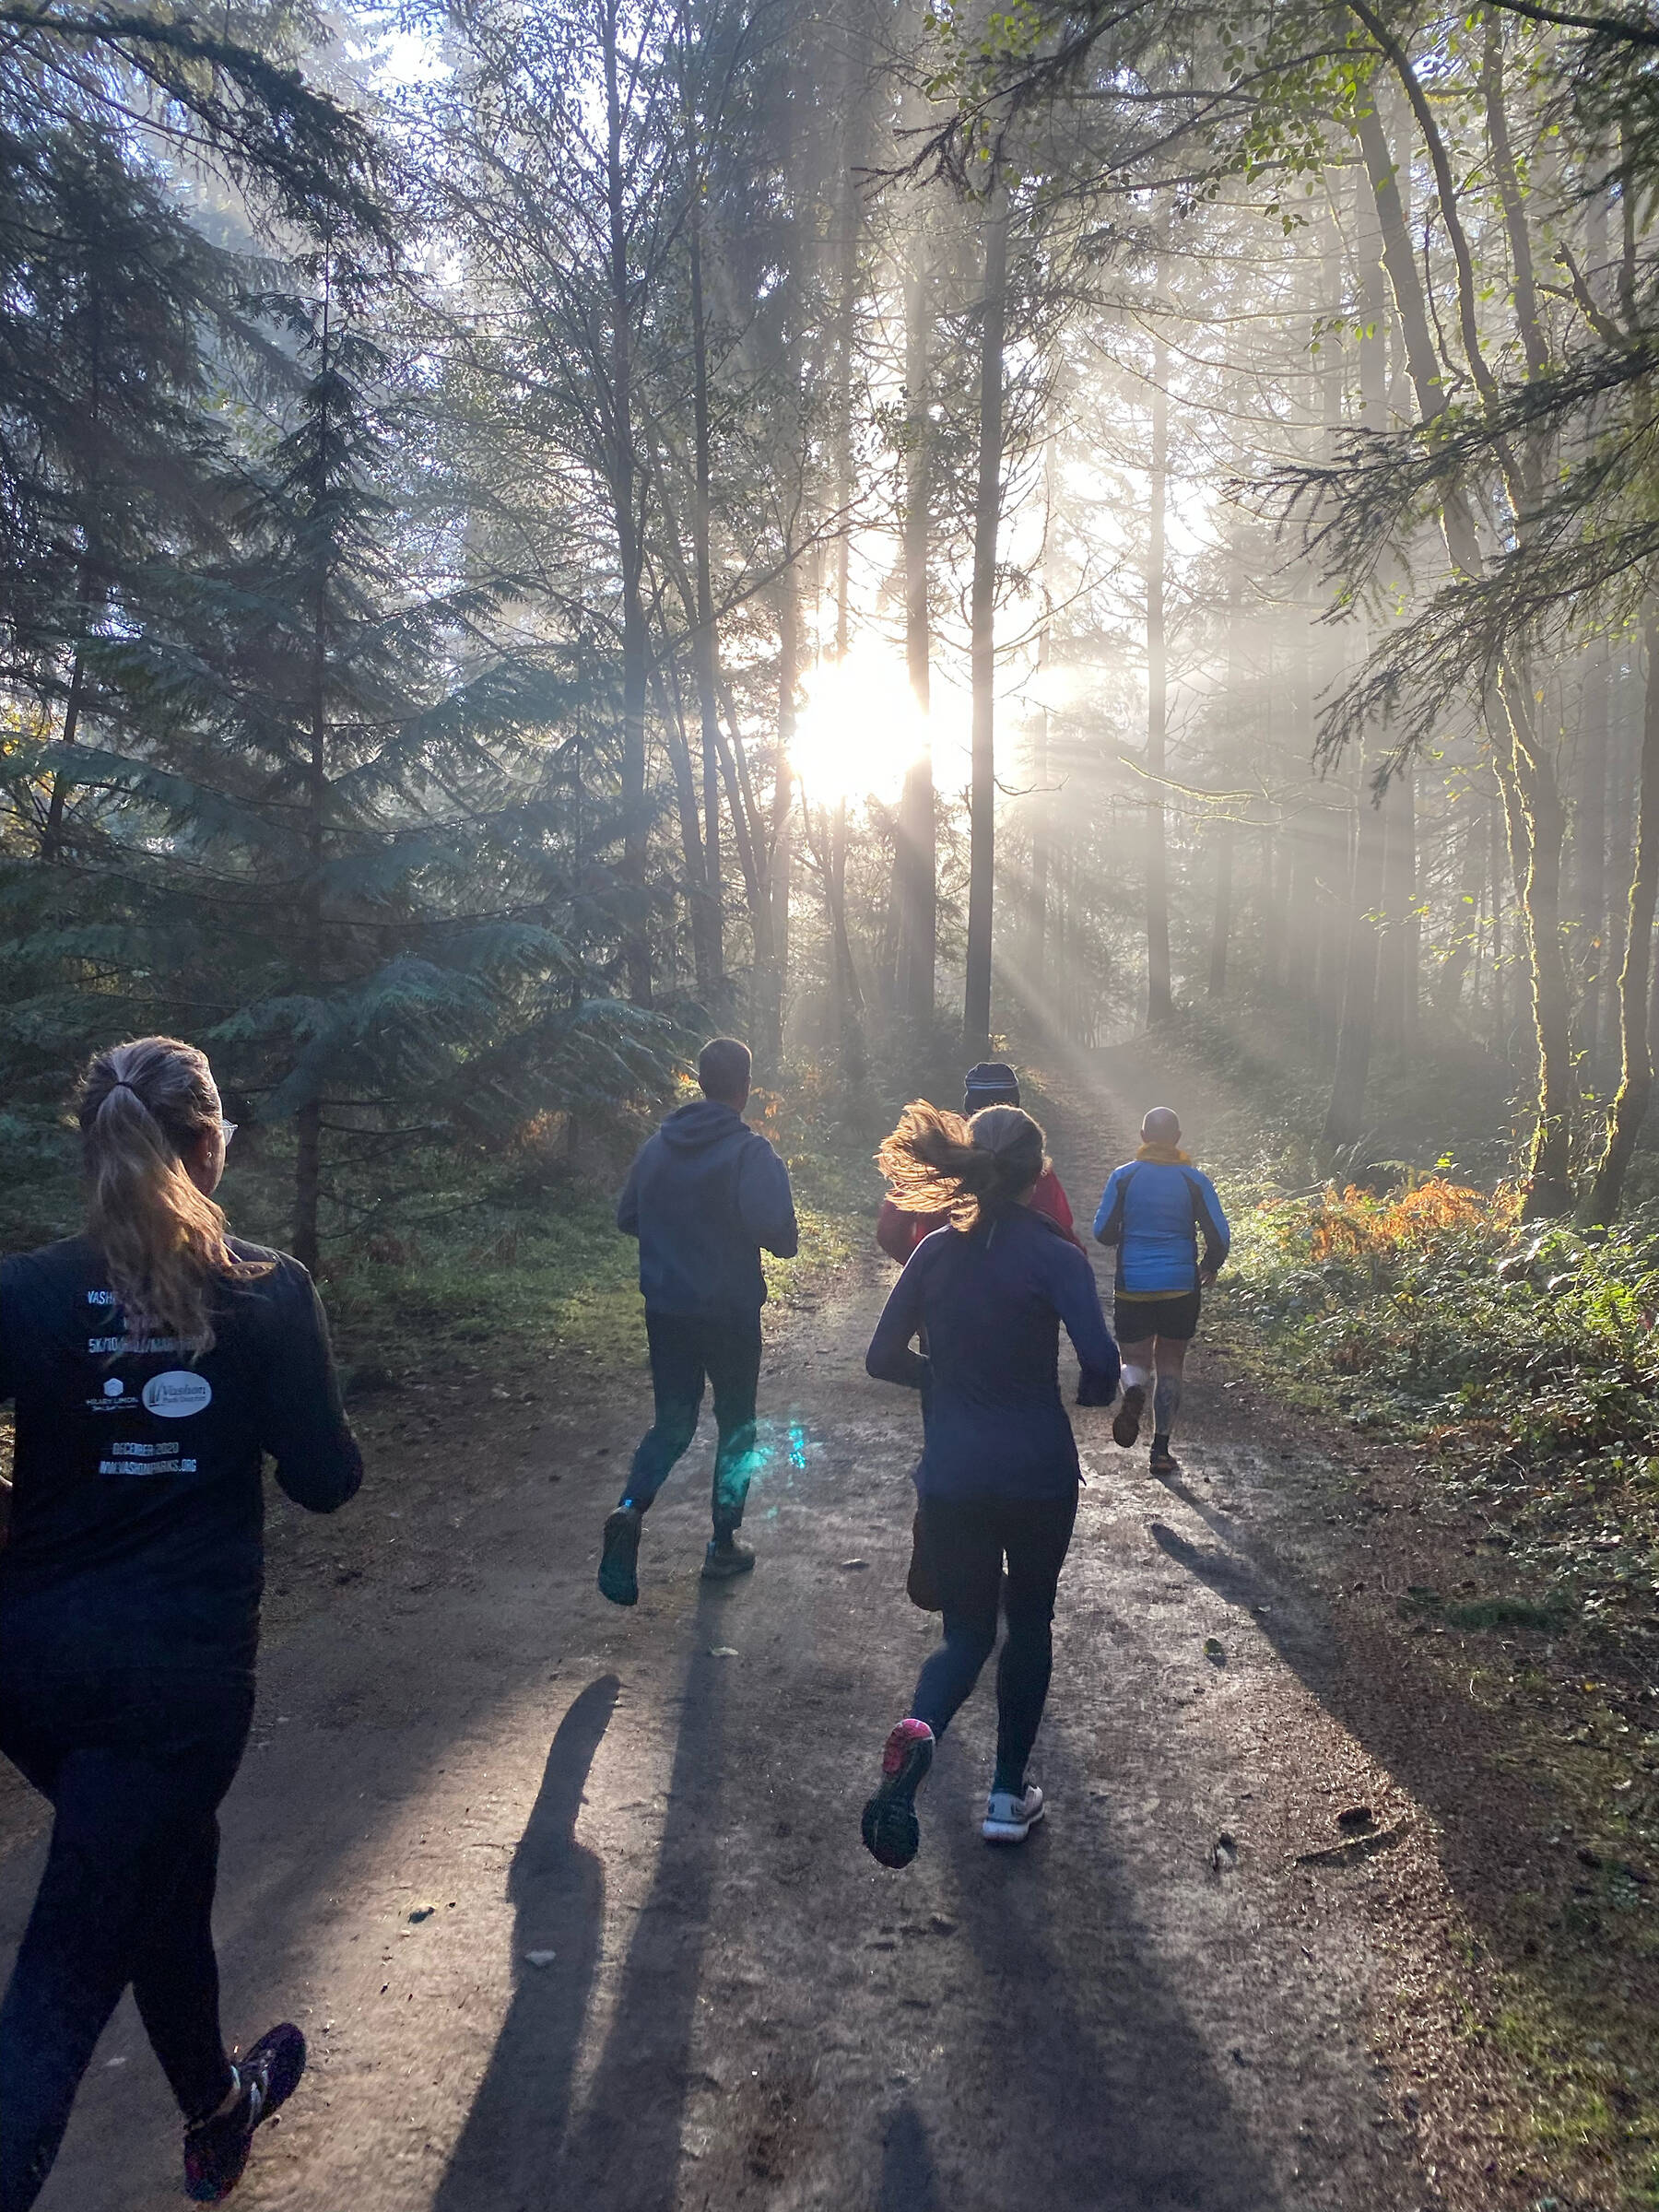 Turkey Trotters made their way through the morning sun and fog on Nov. 24 (Luke Webster Photo).